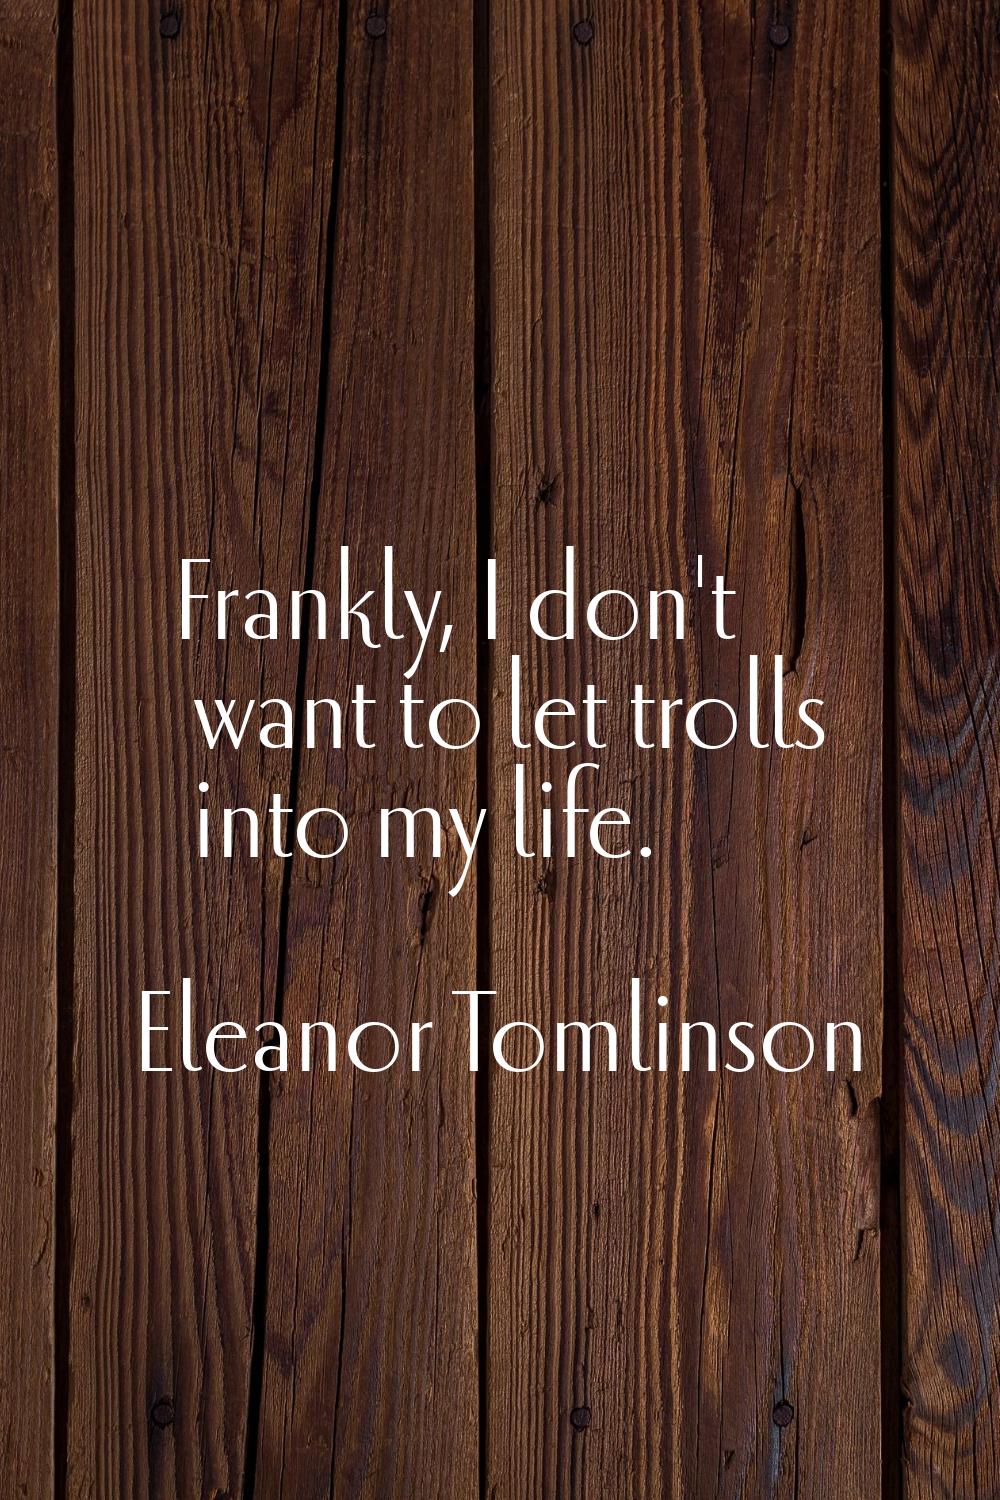 Frankly, I don't want to let trolls into my life.